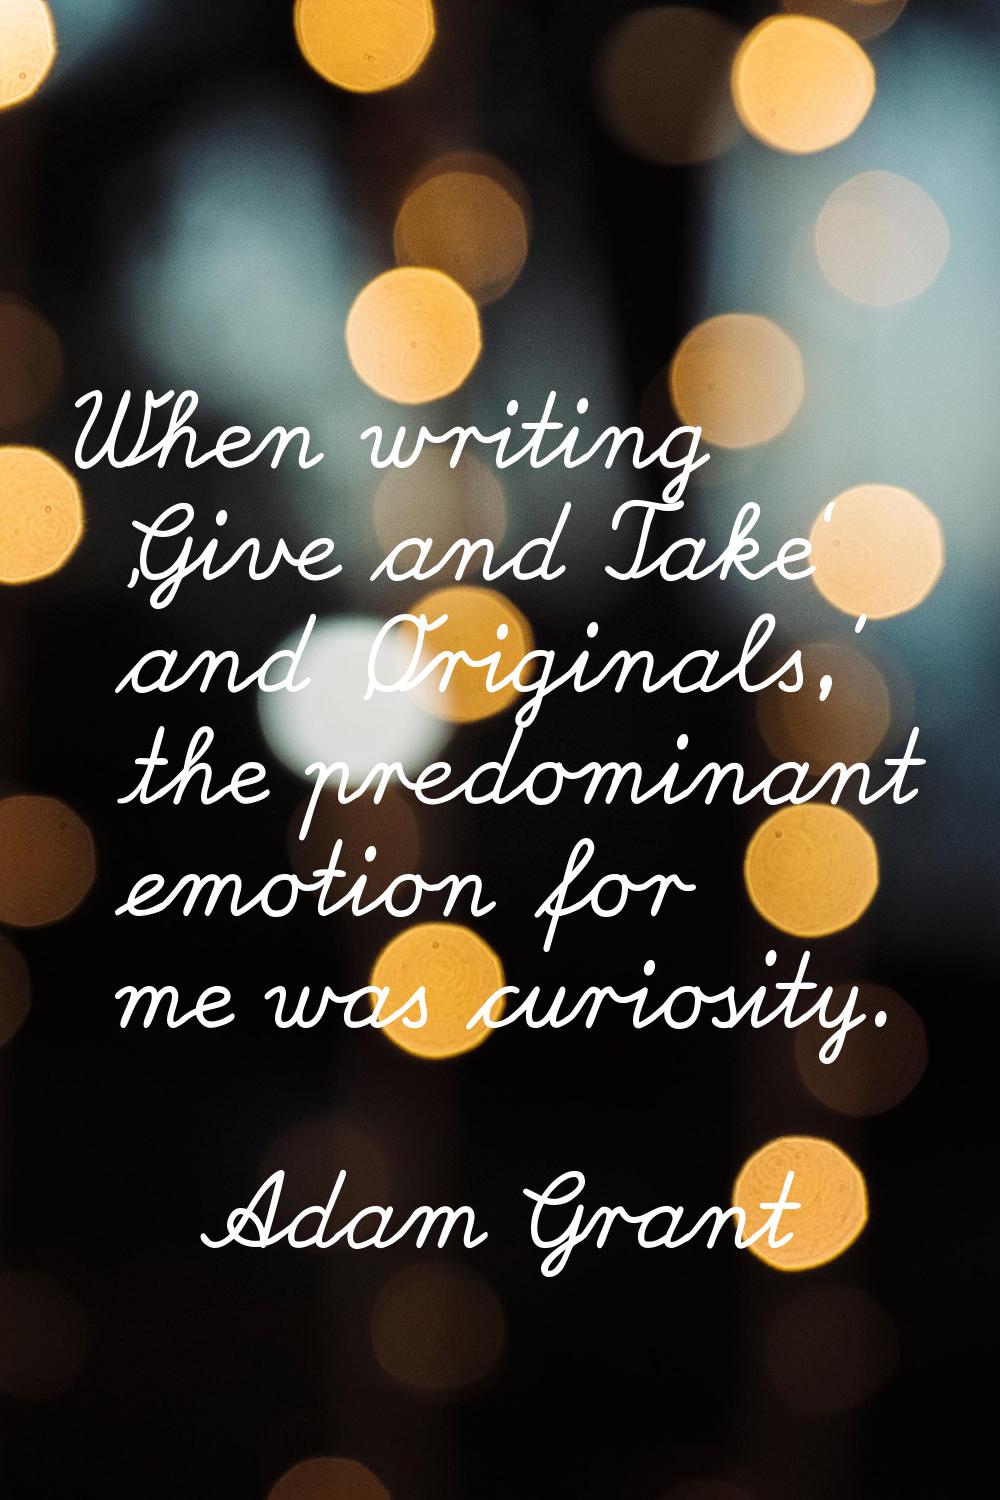 When writing 'Give and Take' and 'Originals,' the predominant emotion for me was curiosity.